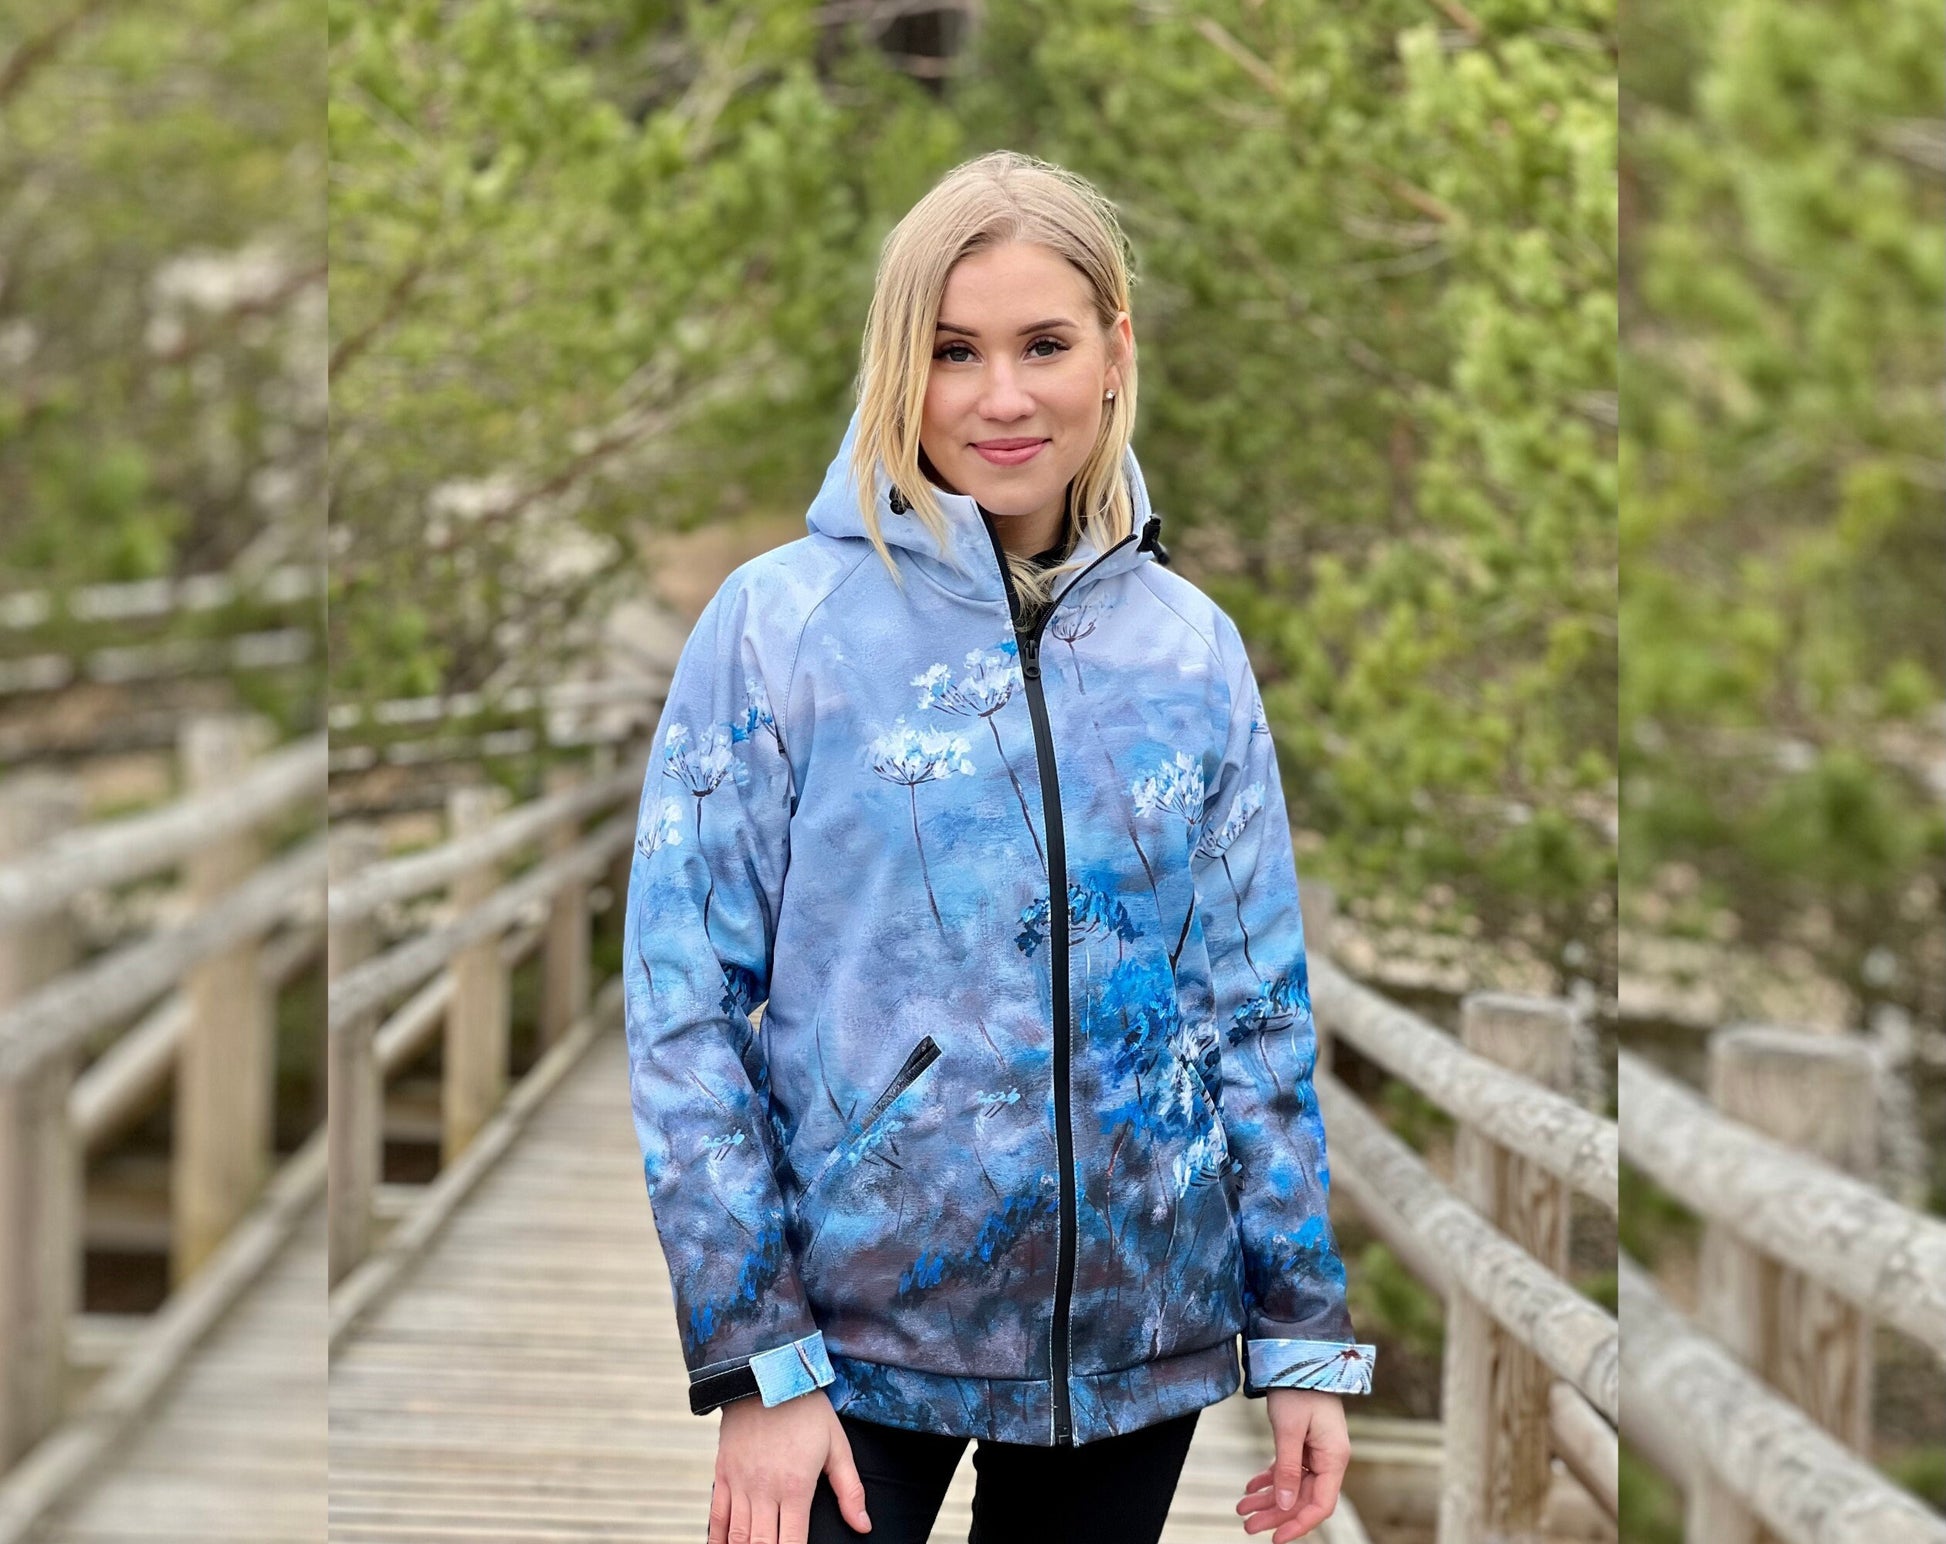 Windproof Jacket with pockets, Outwear, Floral Jacket, Sport Jacket for womens, Printed Jacket, Colourful jacket women, Spring Jacket